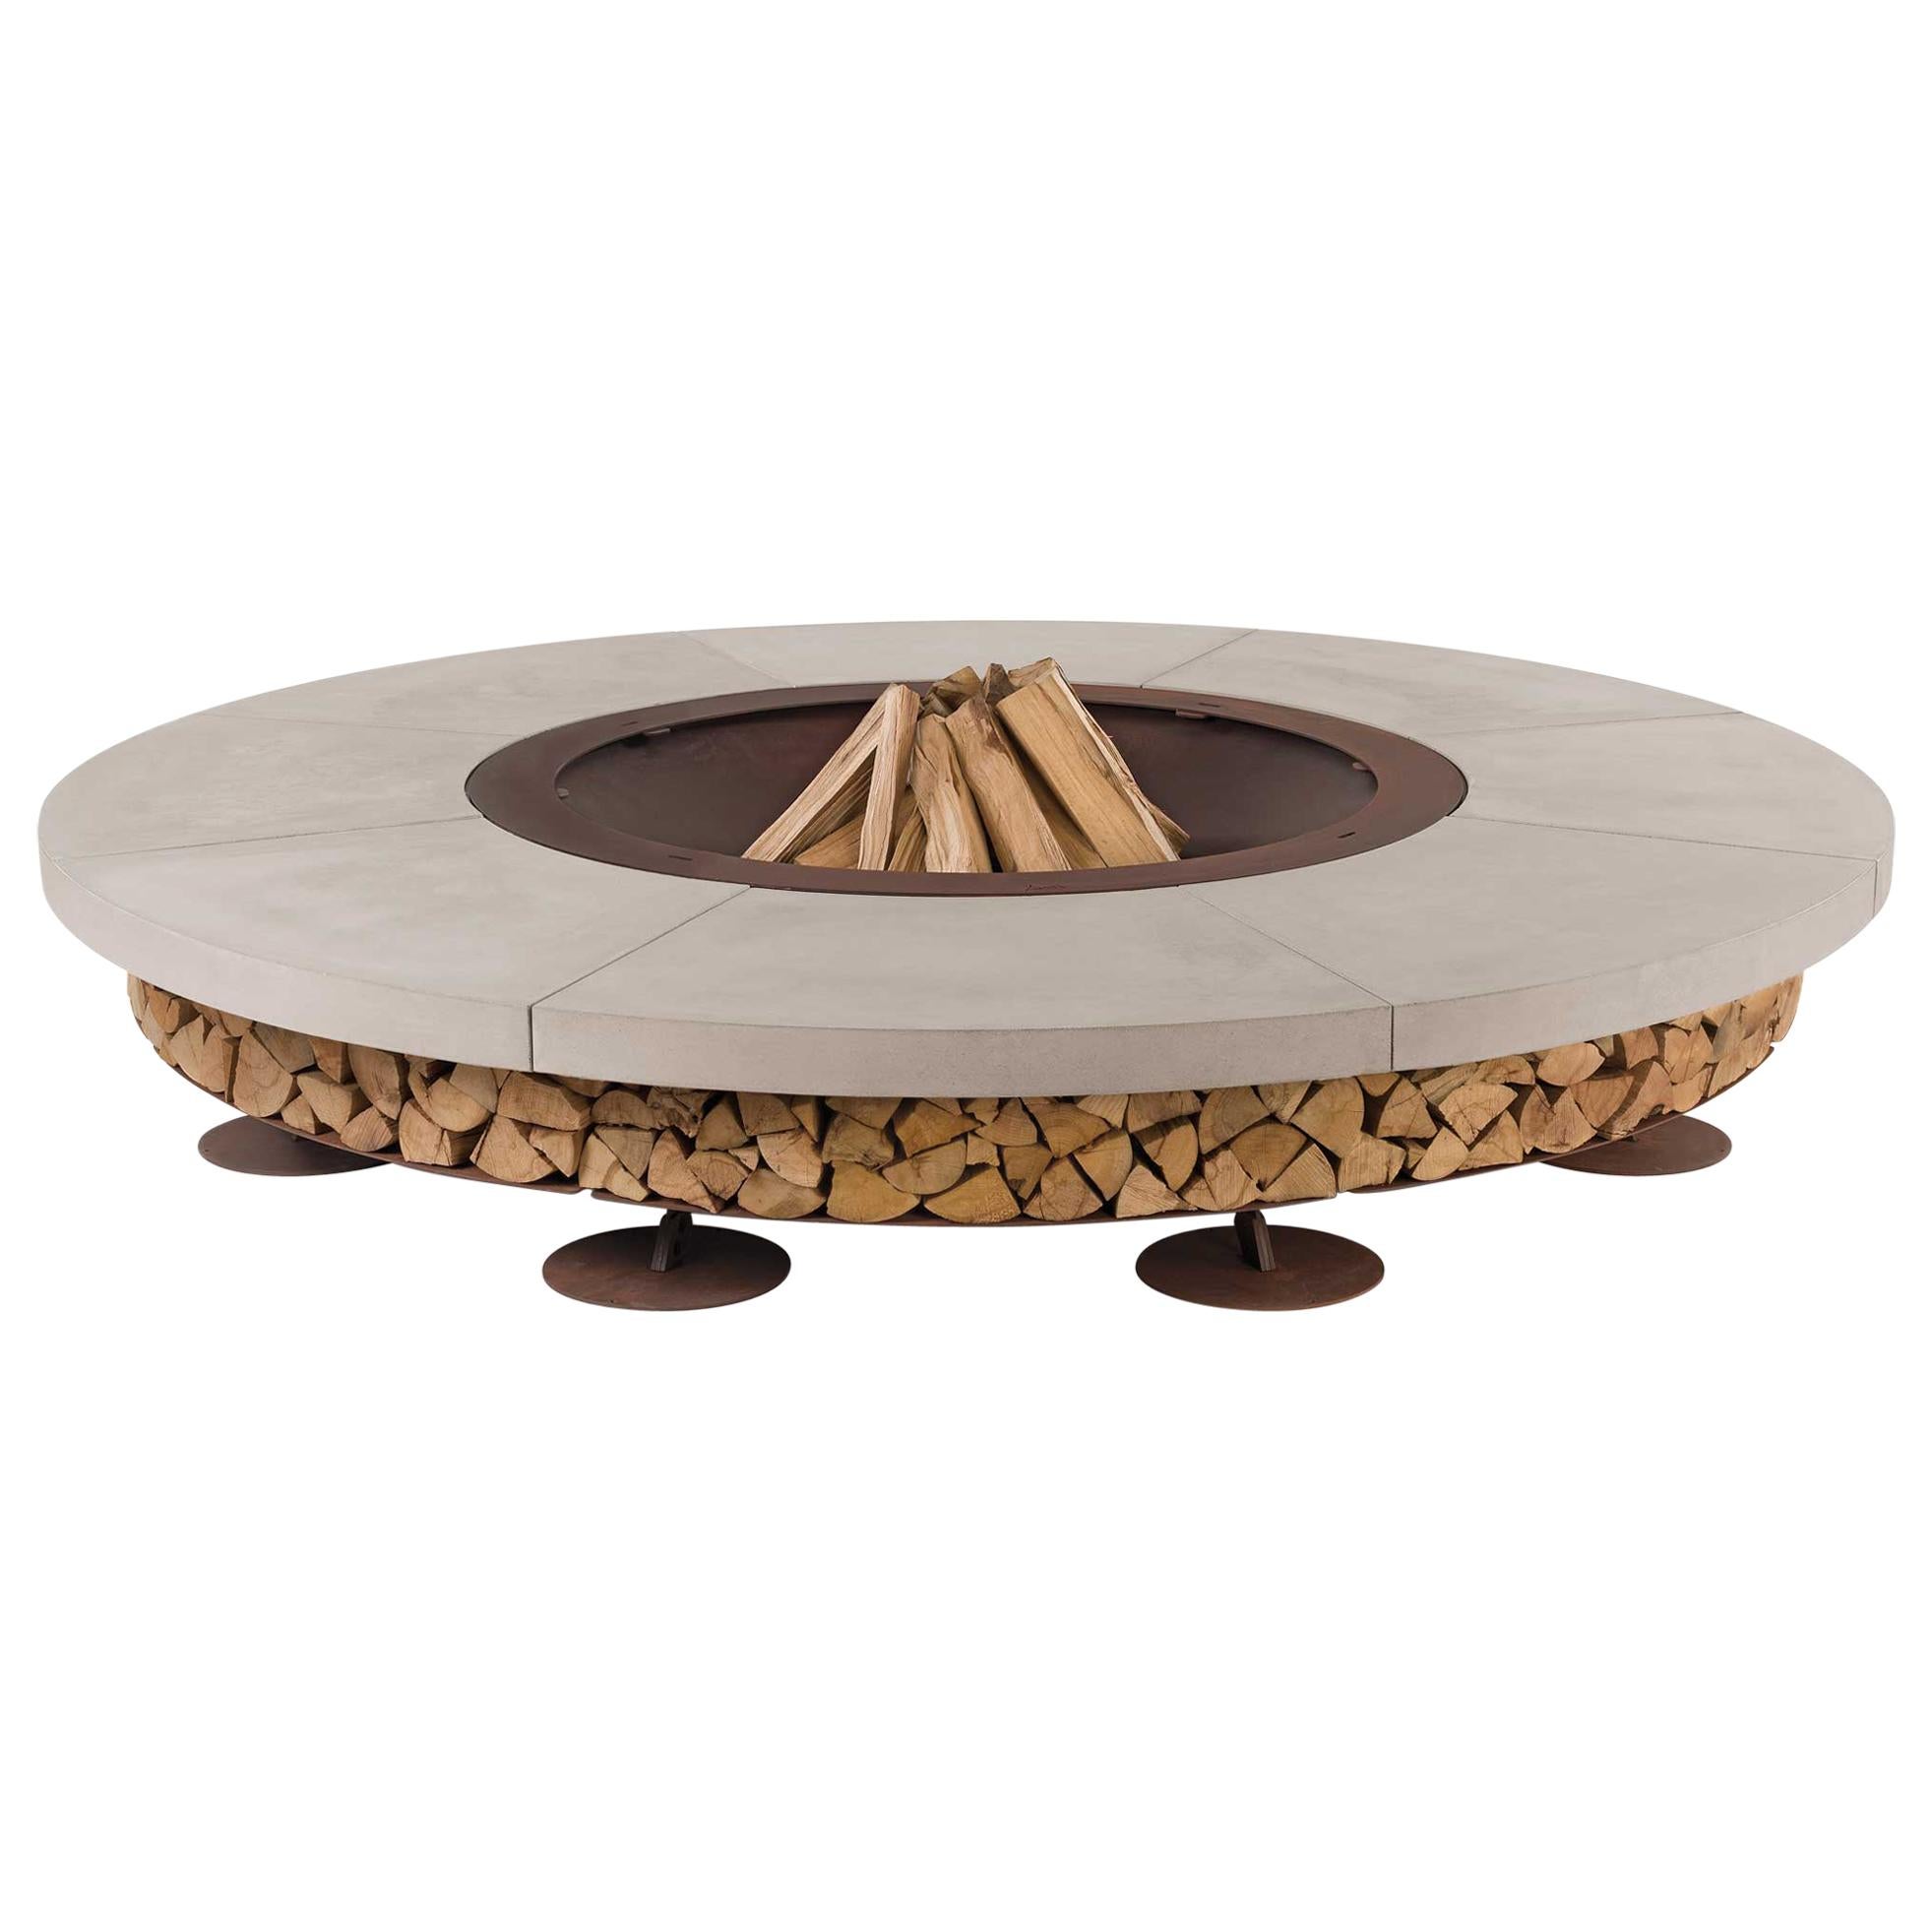 Ercole Large Fire Pit by AK47 Design For Sale